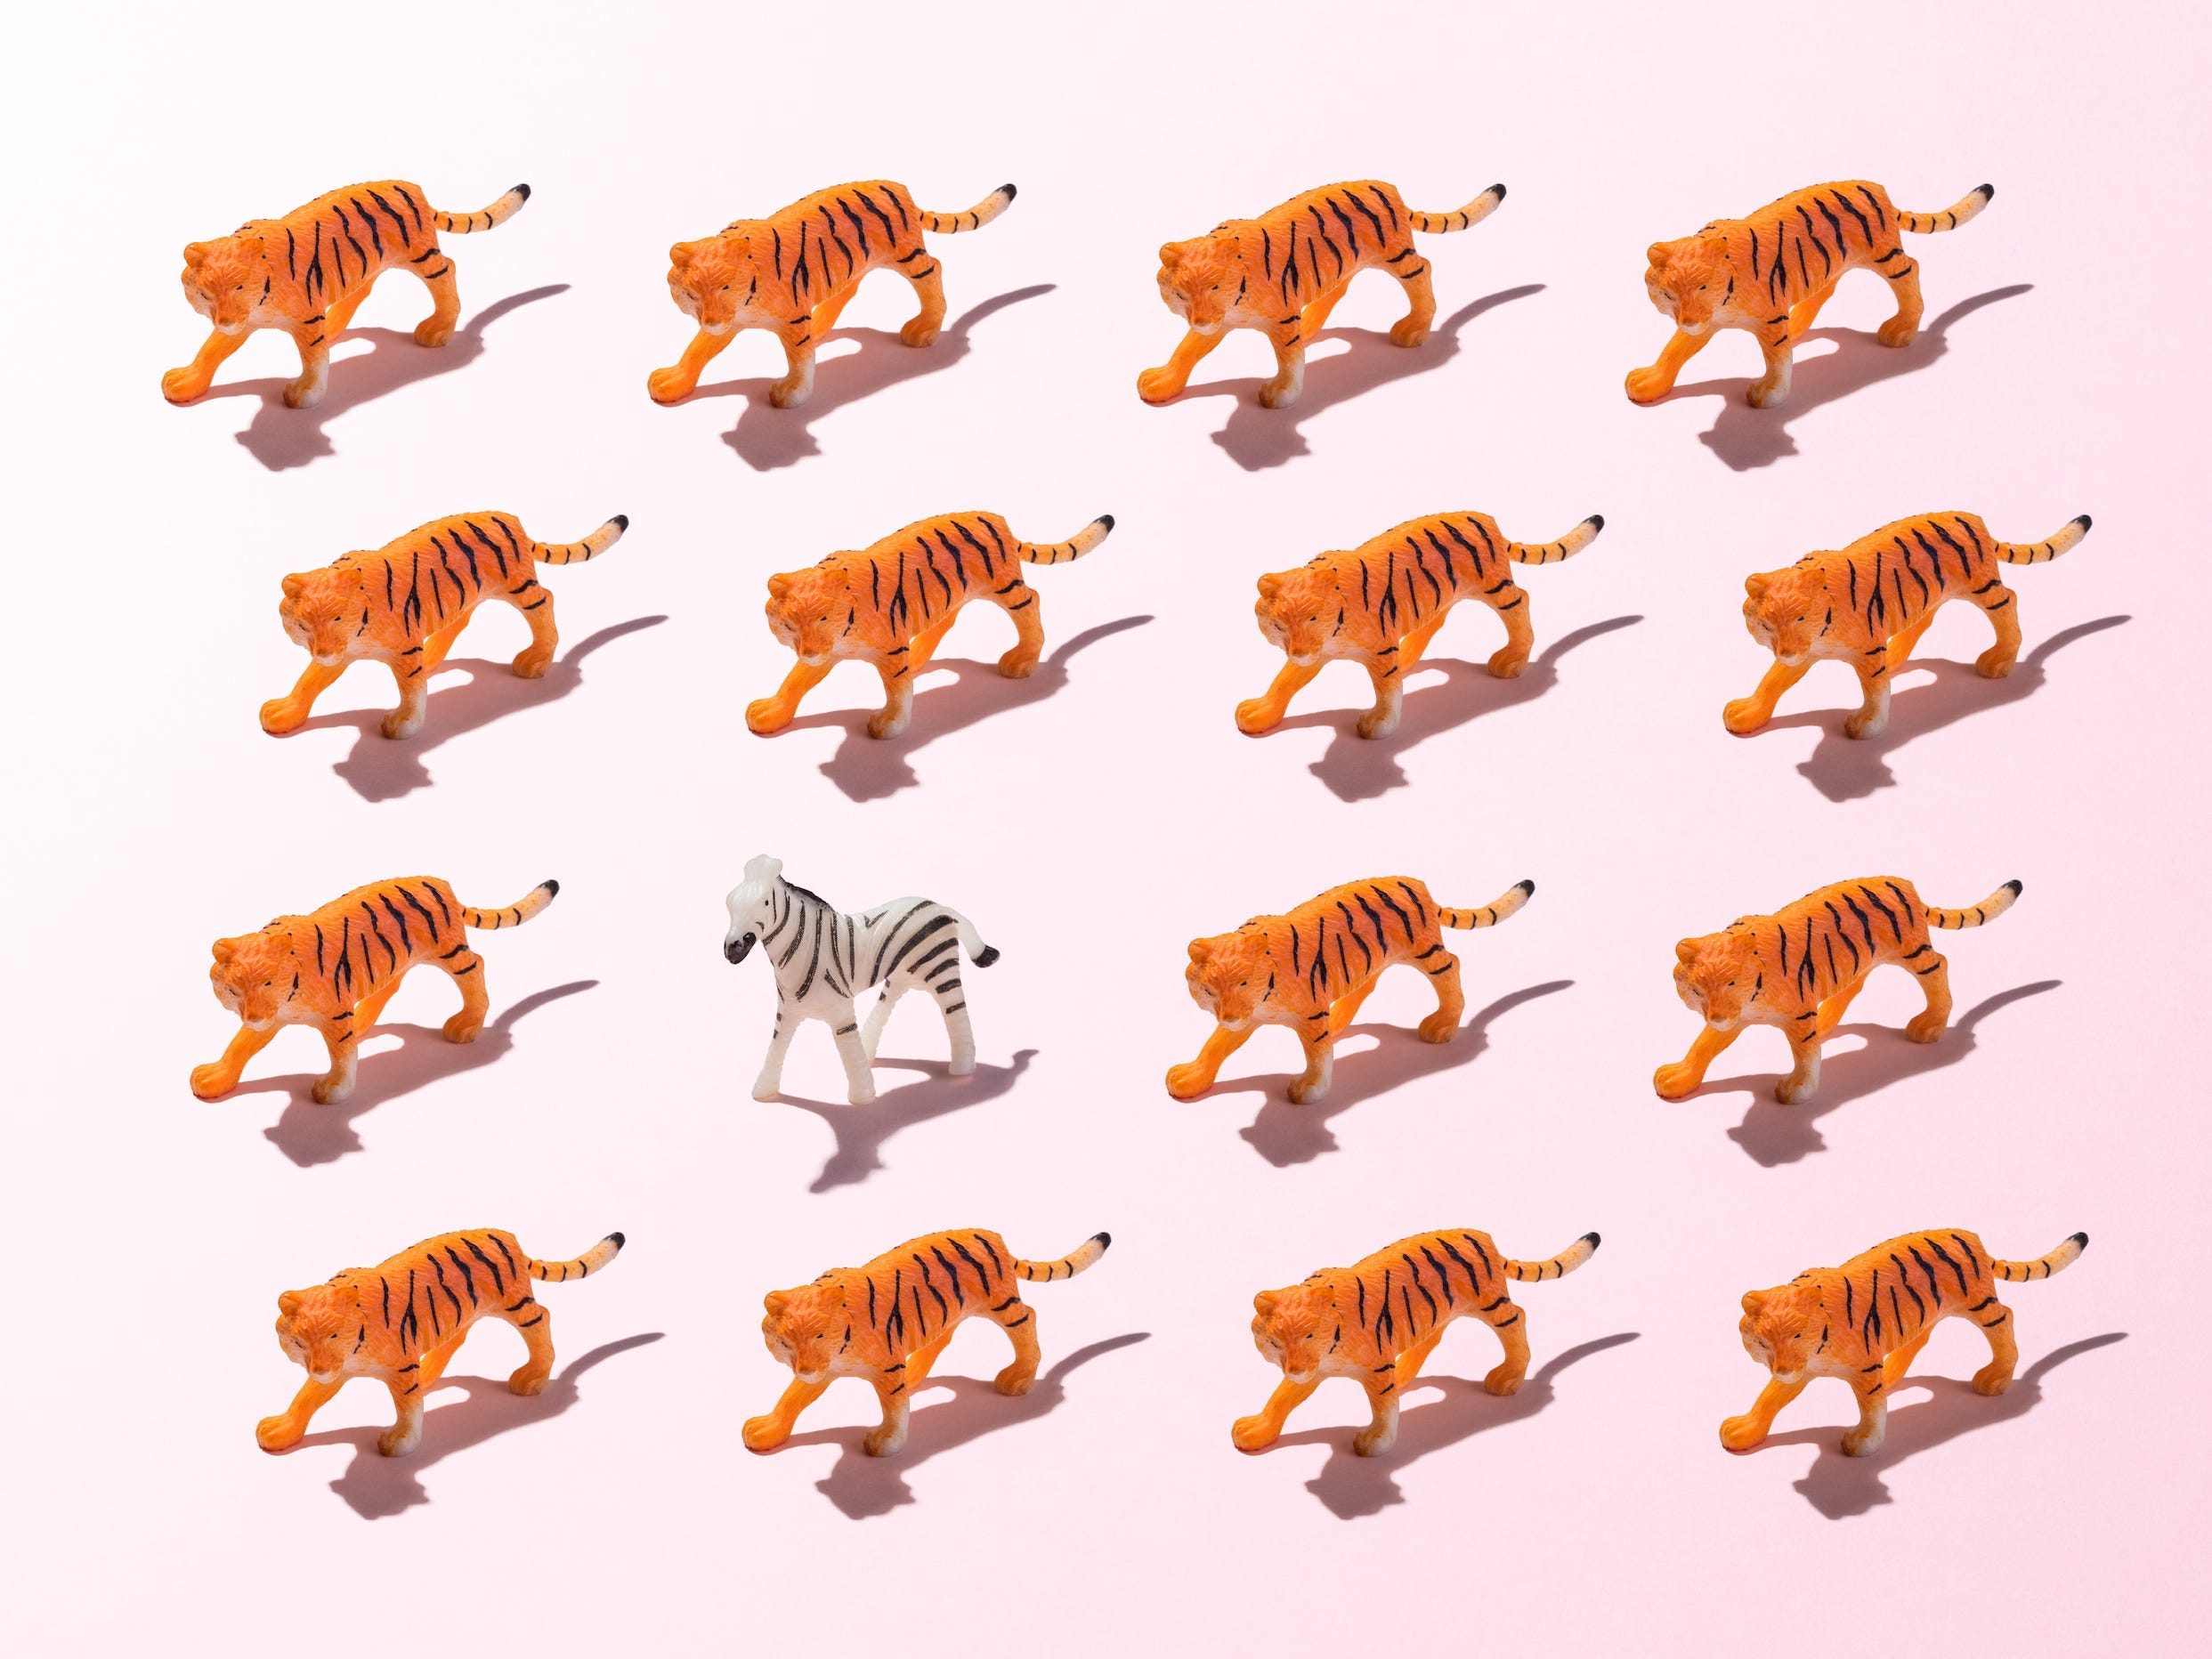 One zebra figurine is pictured among 15 surrounding tiger figurines